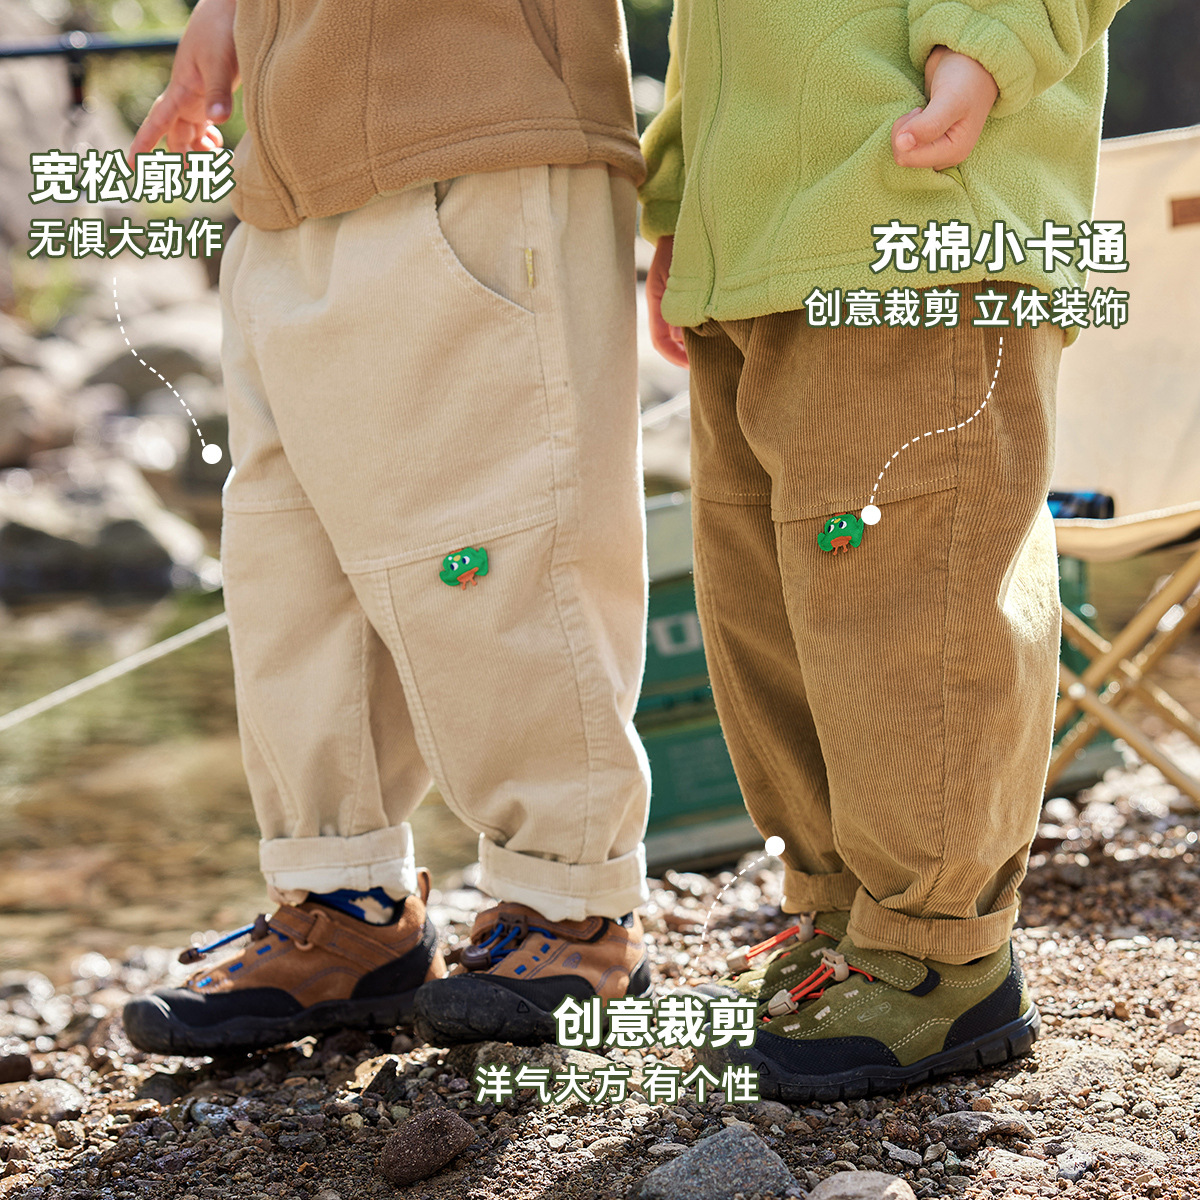 Baby Corduroy Trousers Autumn Boys' Casual Pants Baby Trousers Girls' Trousers Clothes Children's Autumn Fashion